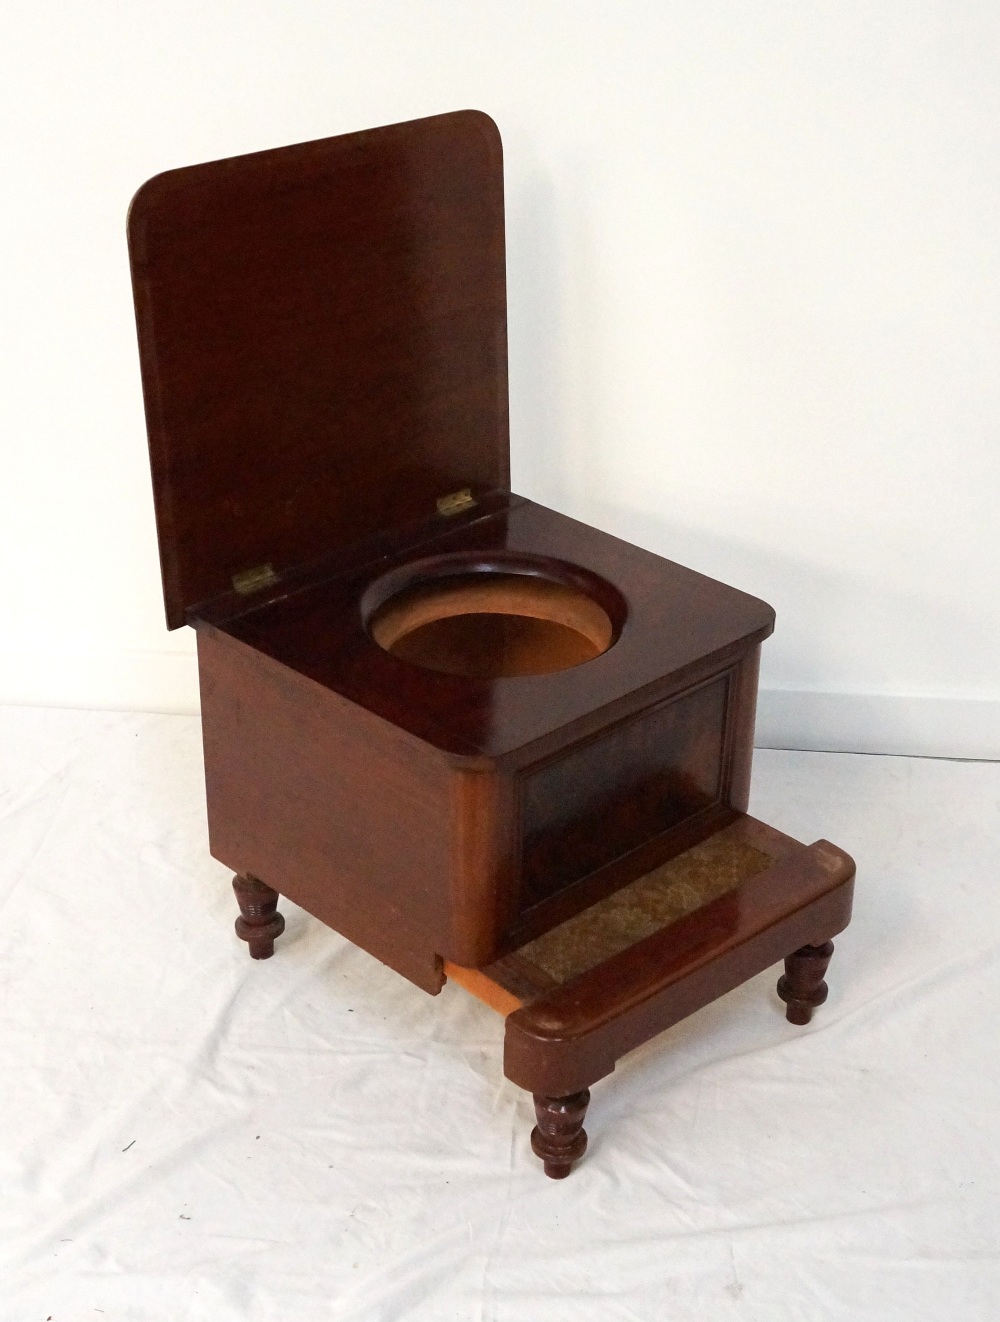 LATE VICTORIAN MAHOGANY STEP COMMODE with a lift up lid and circular recess for the pot,